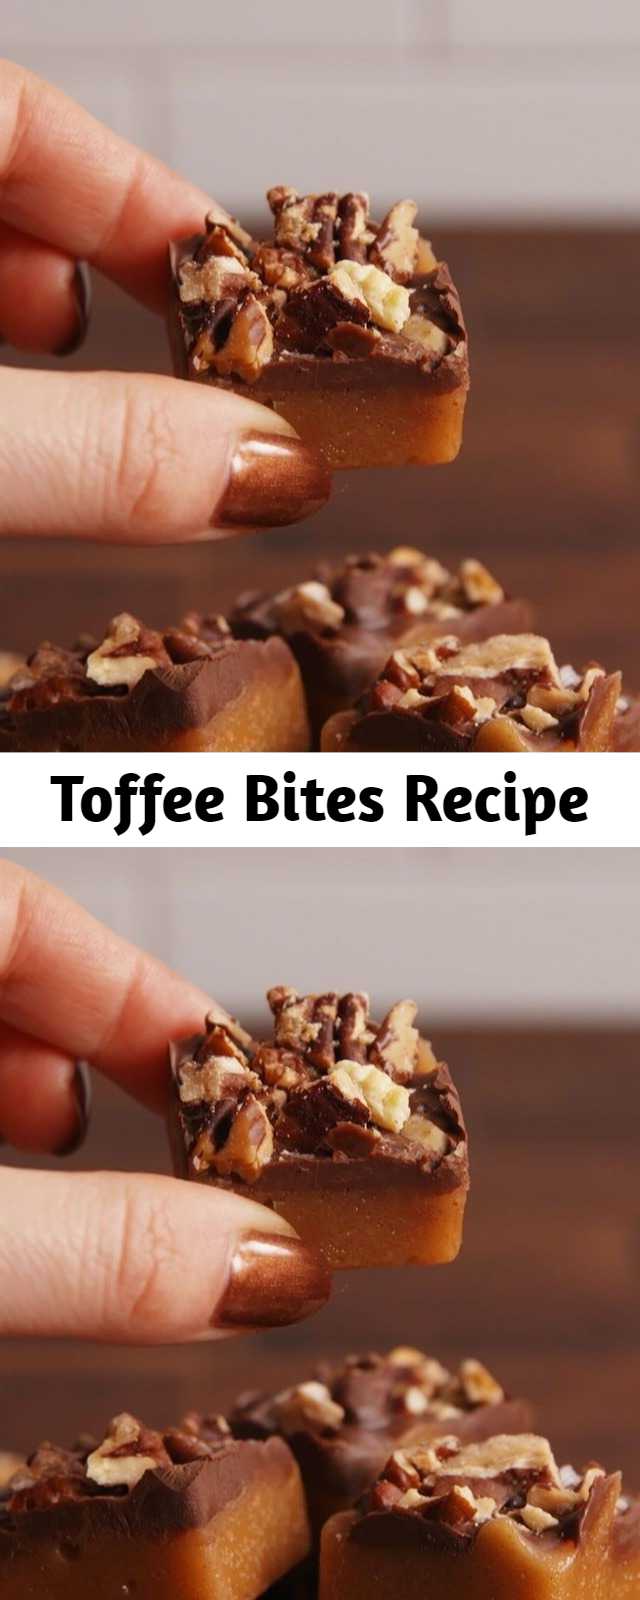 Toffee Bites Recipe - Individual Toffee Bites are perfect for sharing. #food #easyrecipe #recipe #gifts #holiday #christmas #pastryporn #kids #ideas #hacks